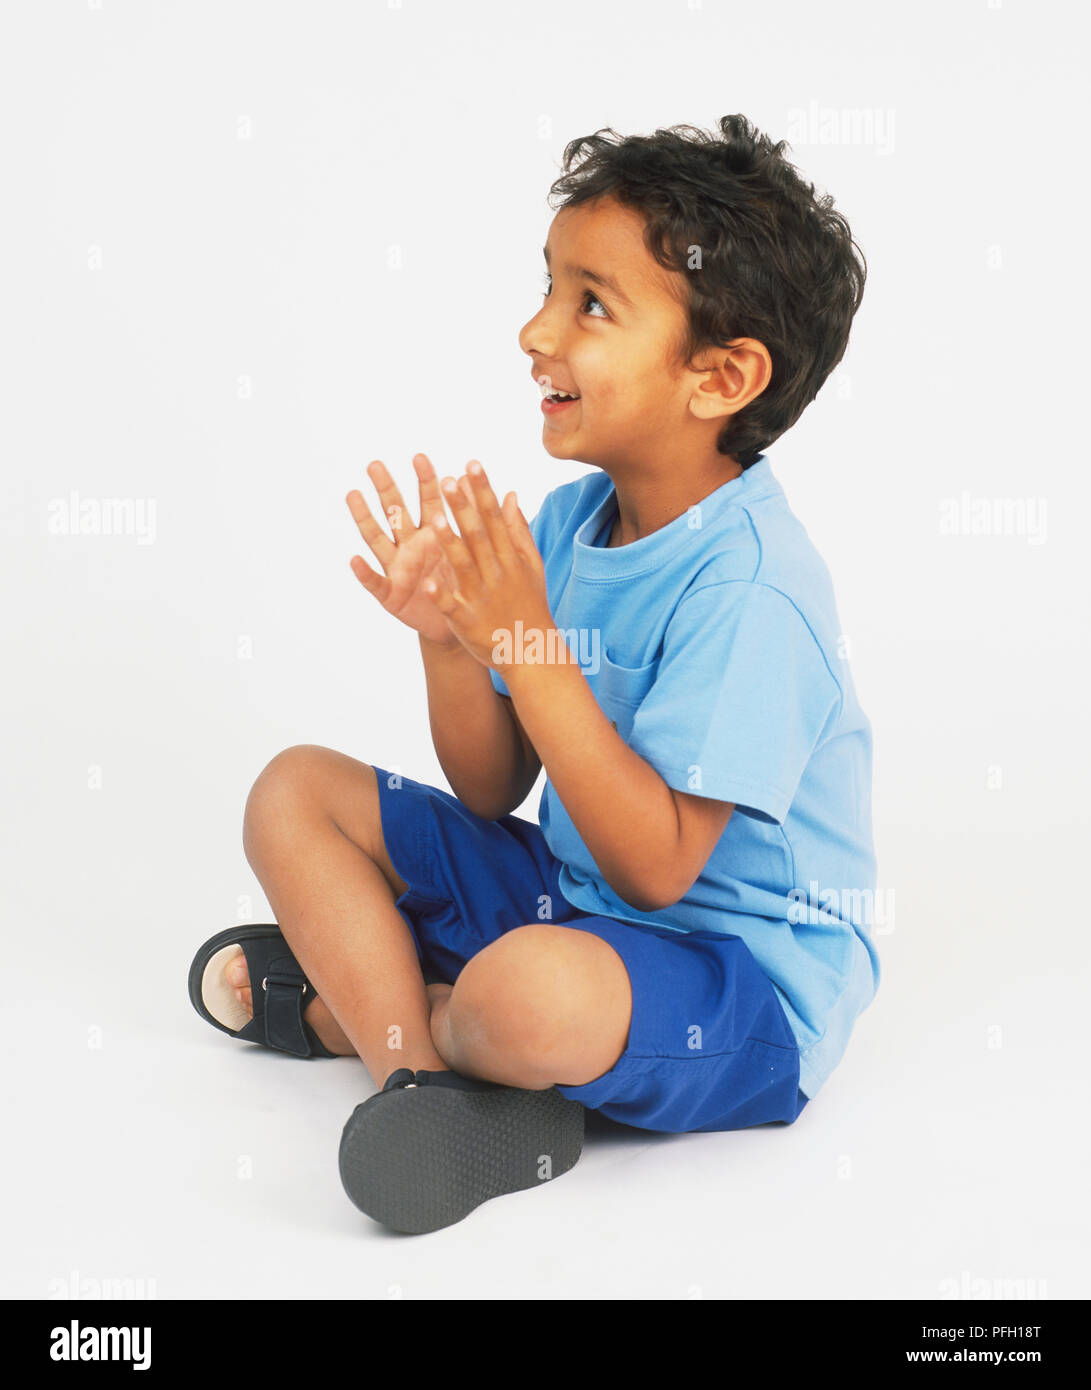 Boy sitting cross legged on floor, looking up and clapping hands Stock Photo